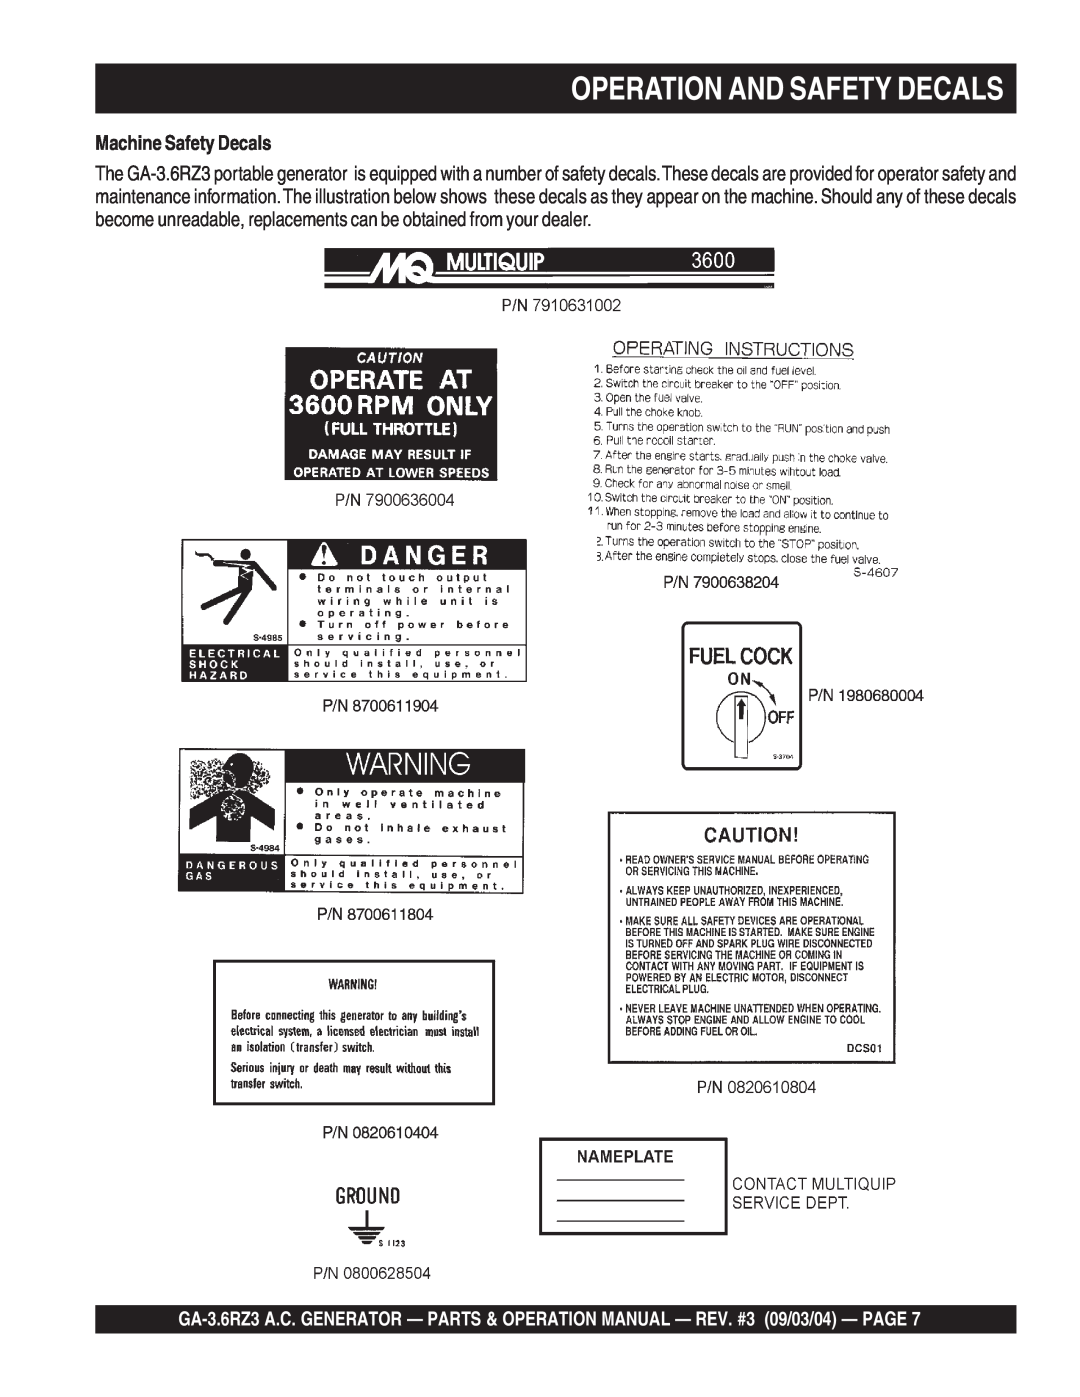 Multiquip GA-3.6RZ3 operation manual Operation And Safety Decals, Machine Safety Decals 